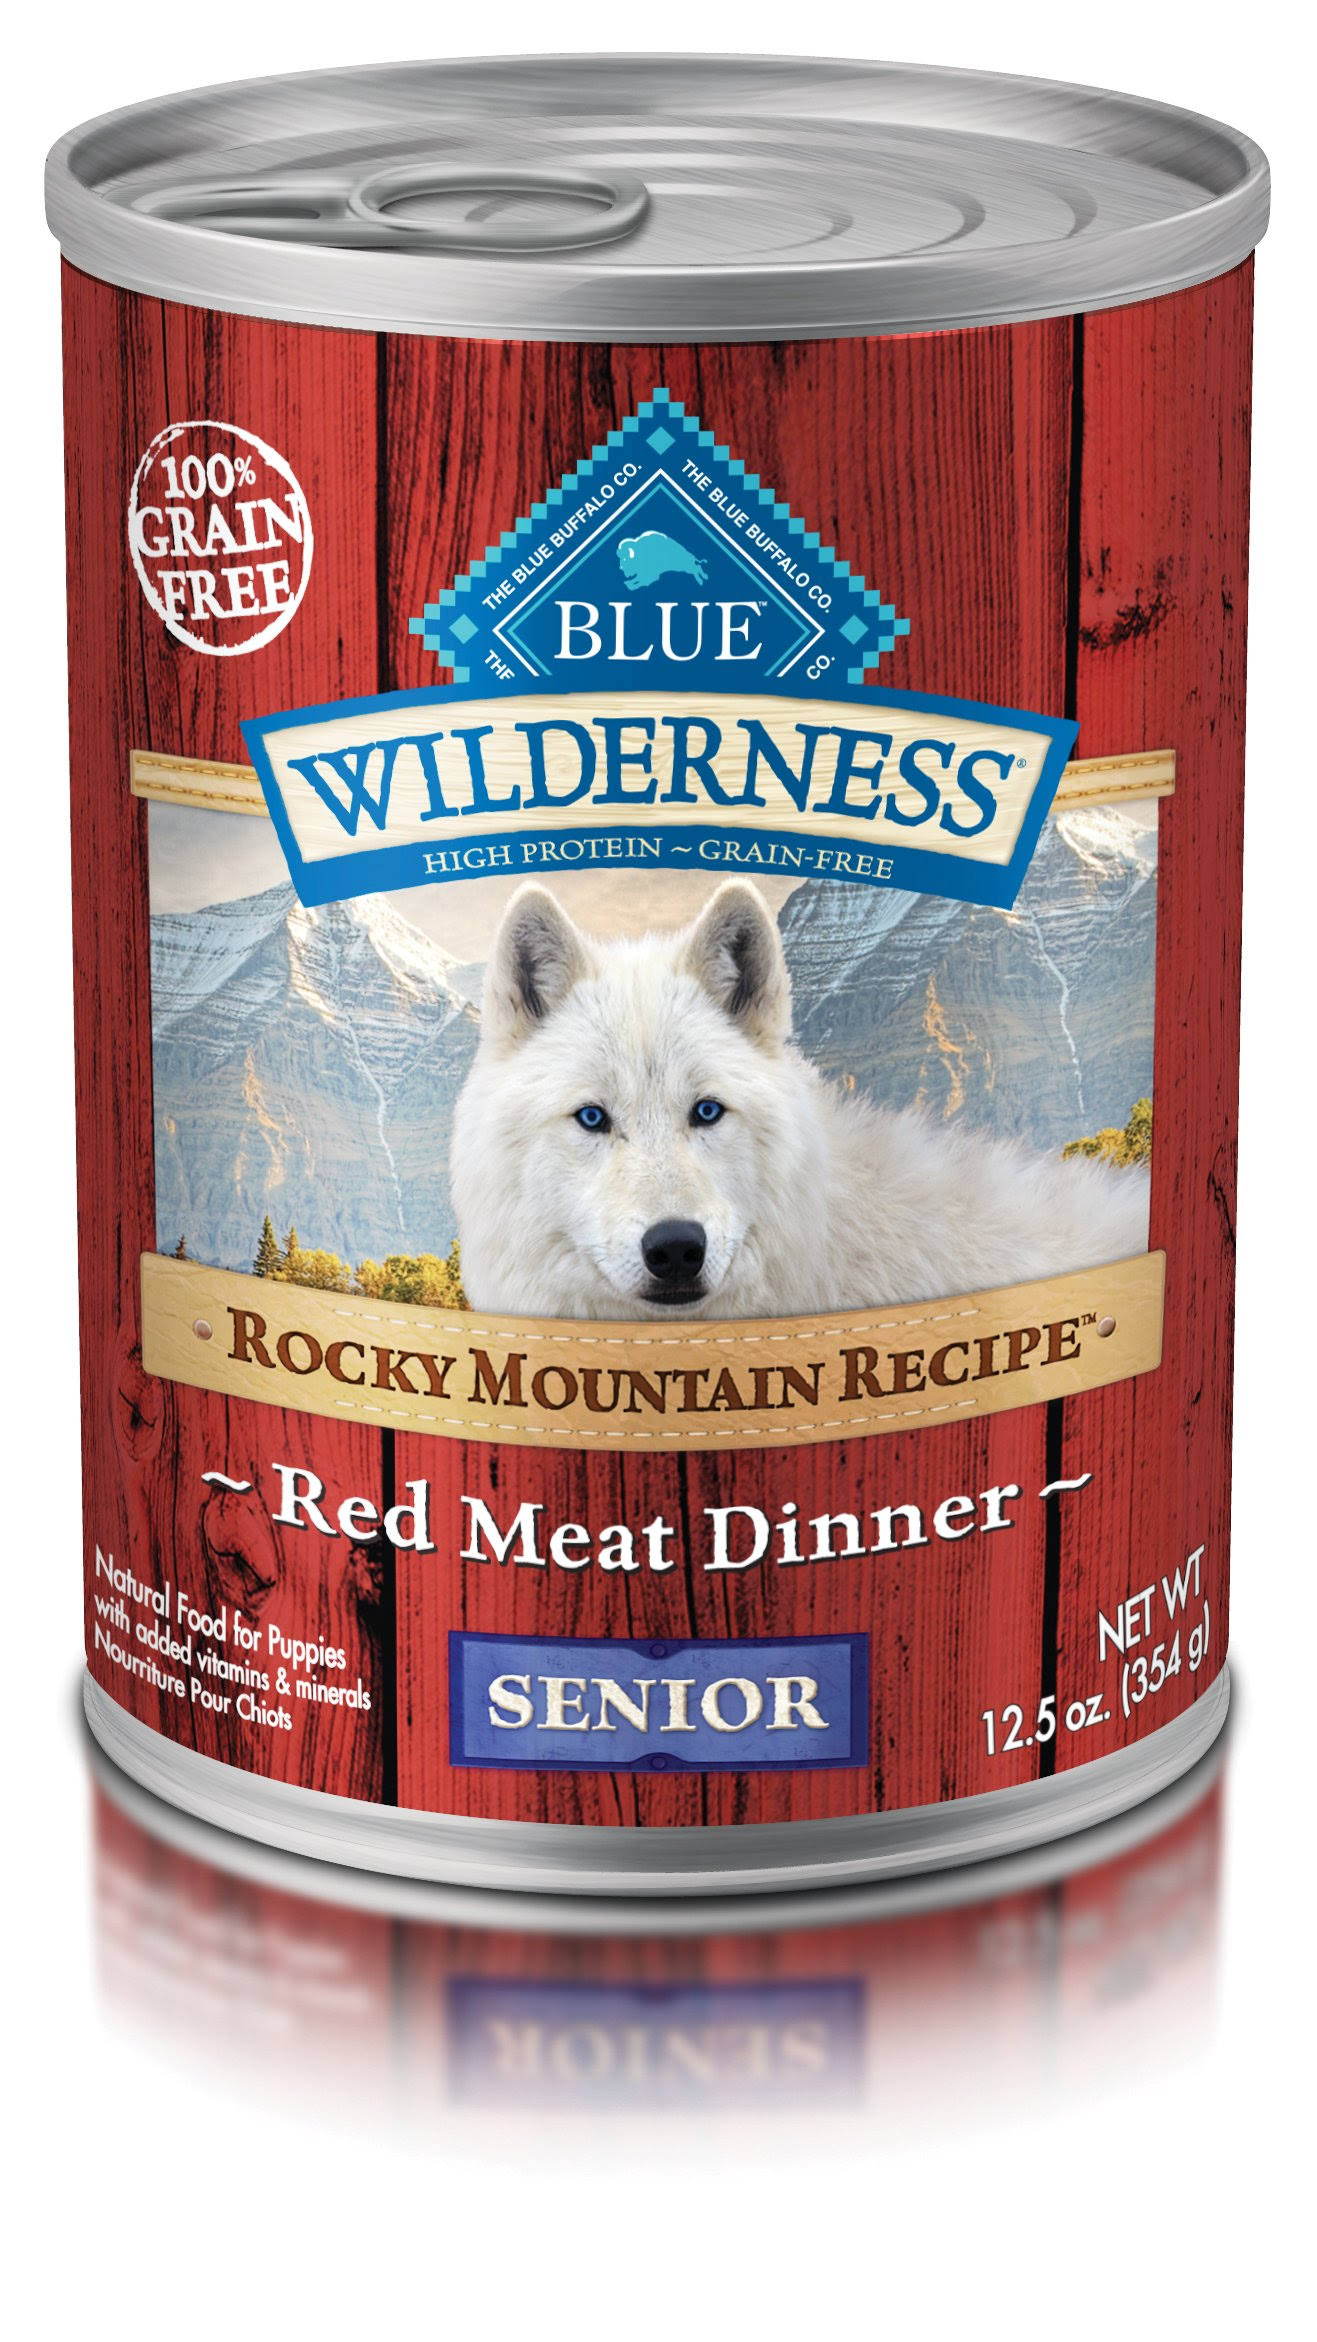 Blue Buffalo Wilderness High Protein Wet Senior Dog Food - Rocky Mountain Recipe Red Meat